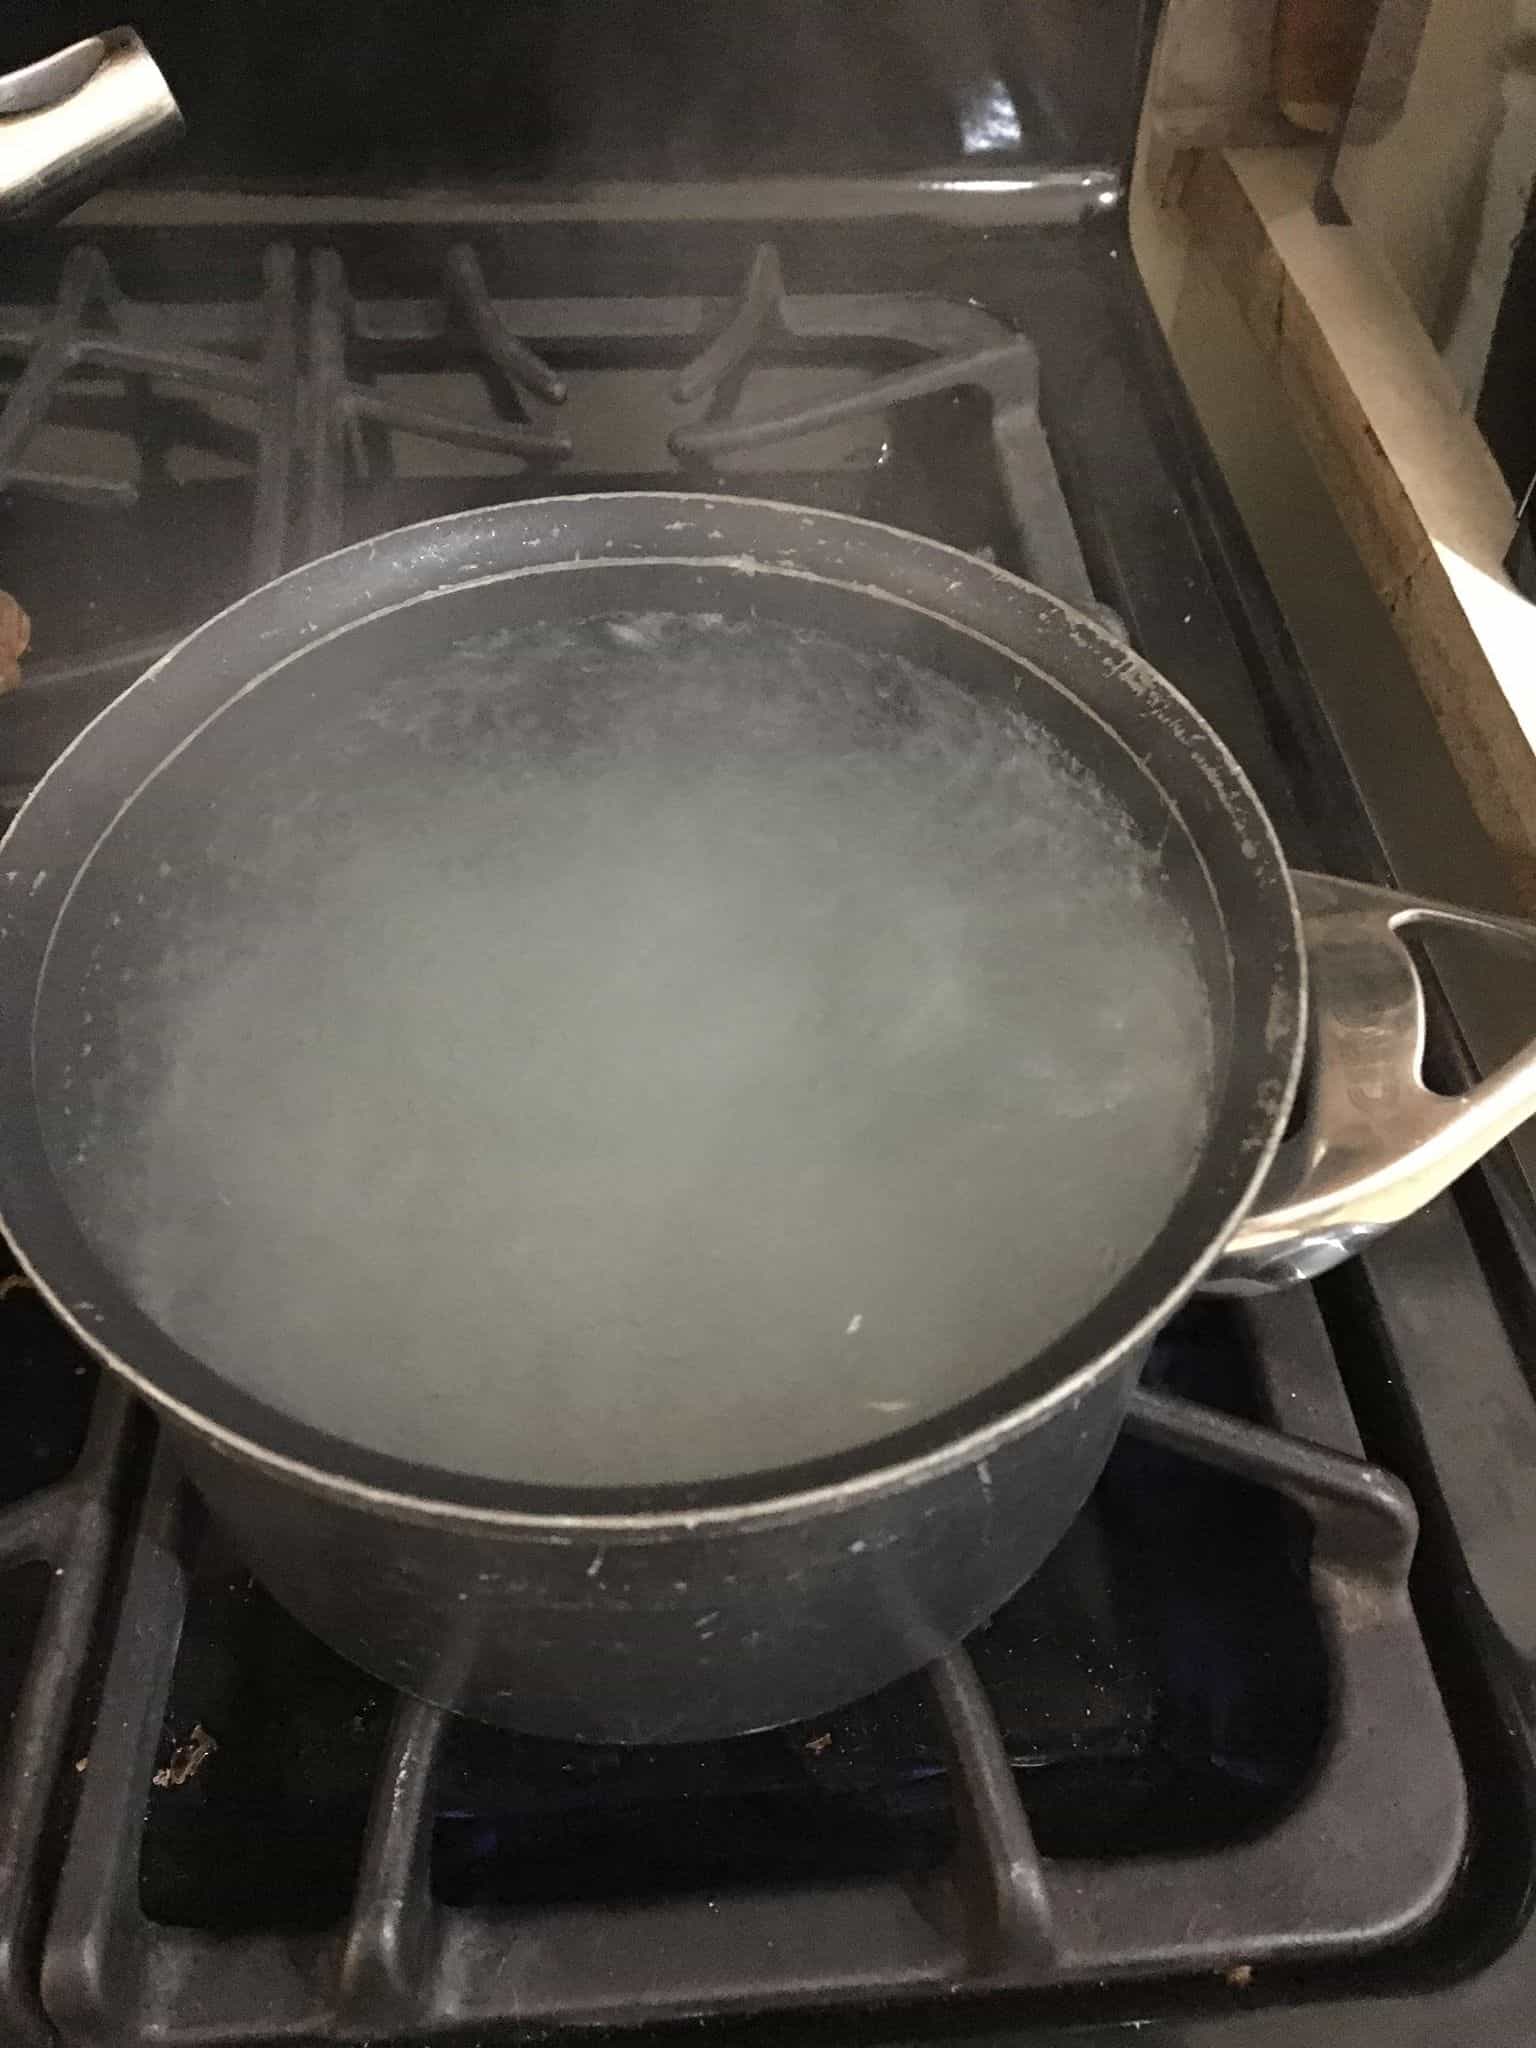 A close up of a metal pan on a stove, with Boiling water.